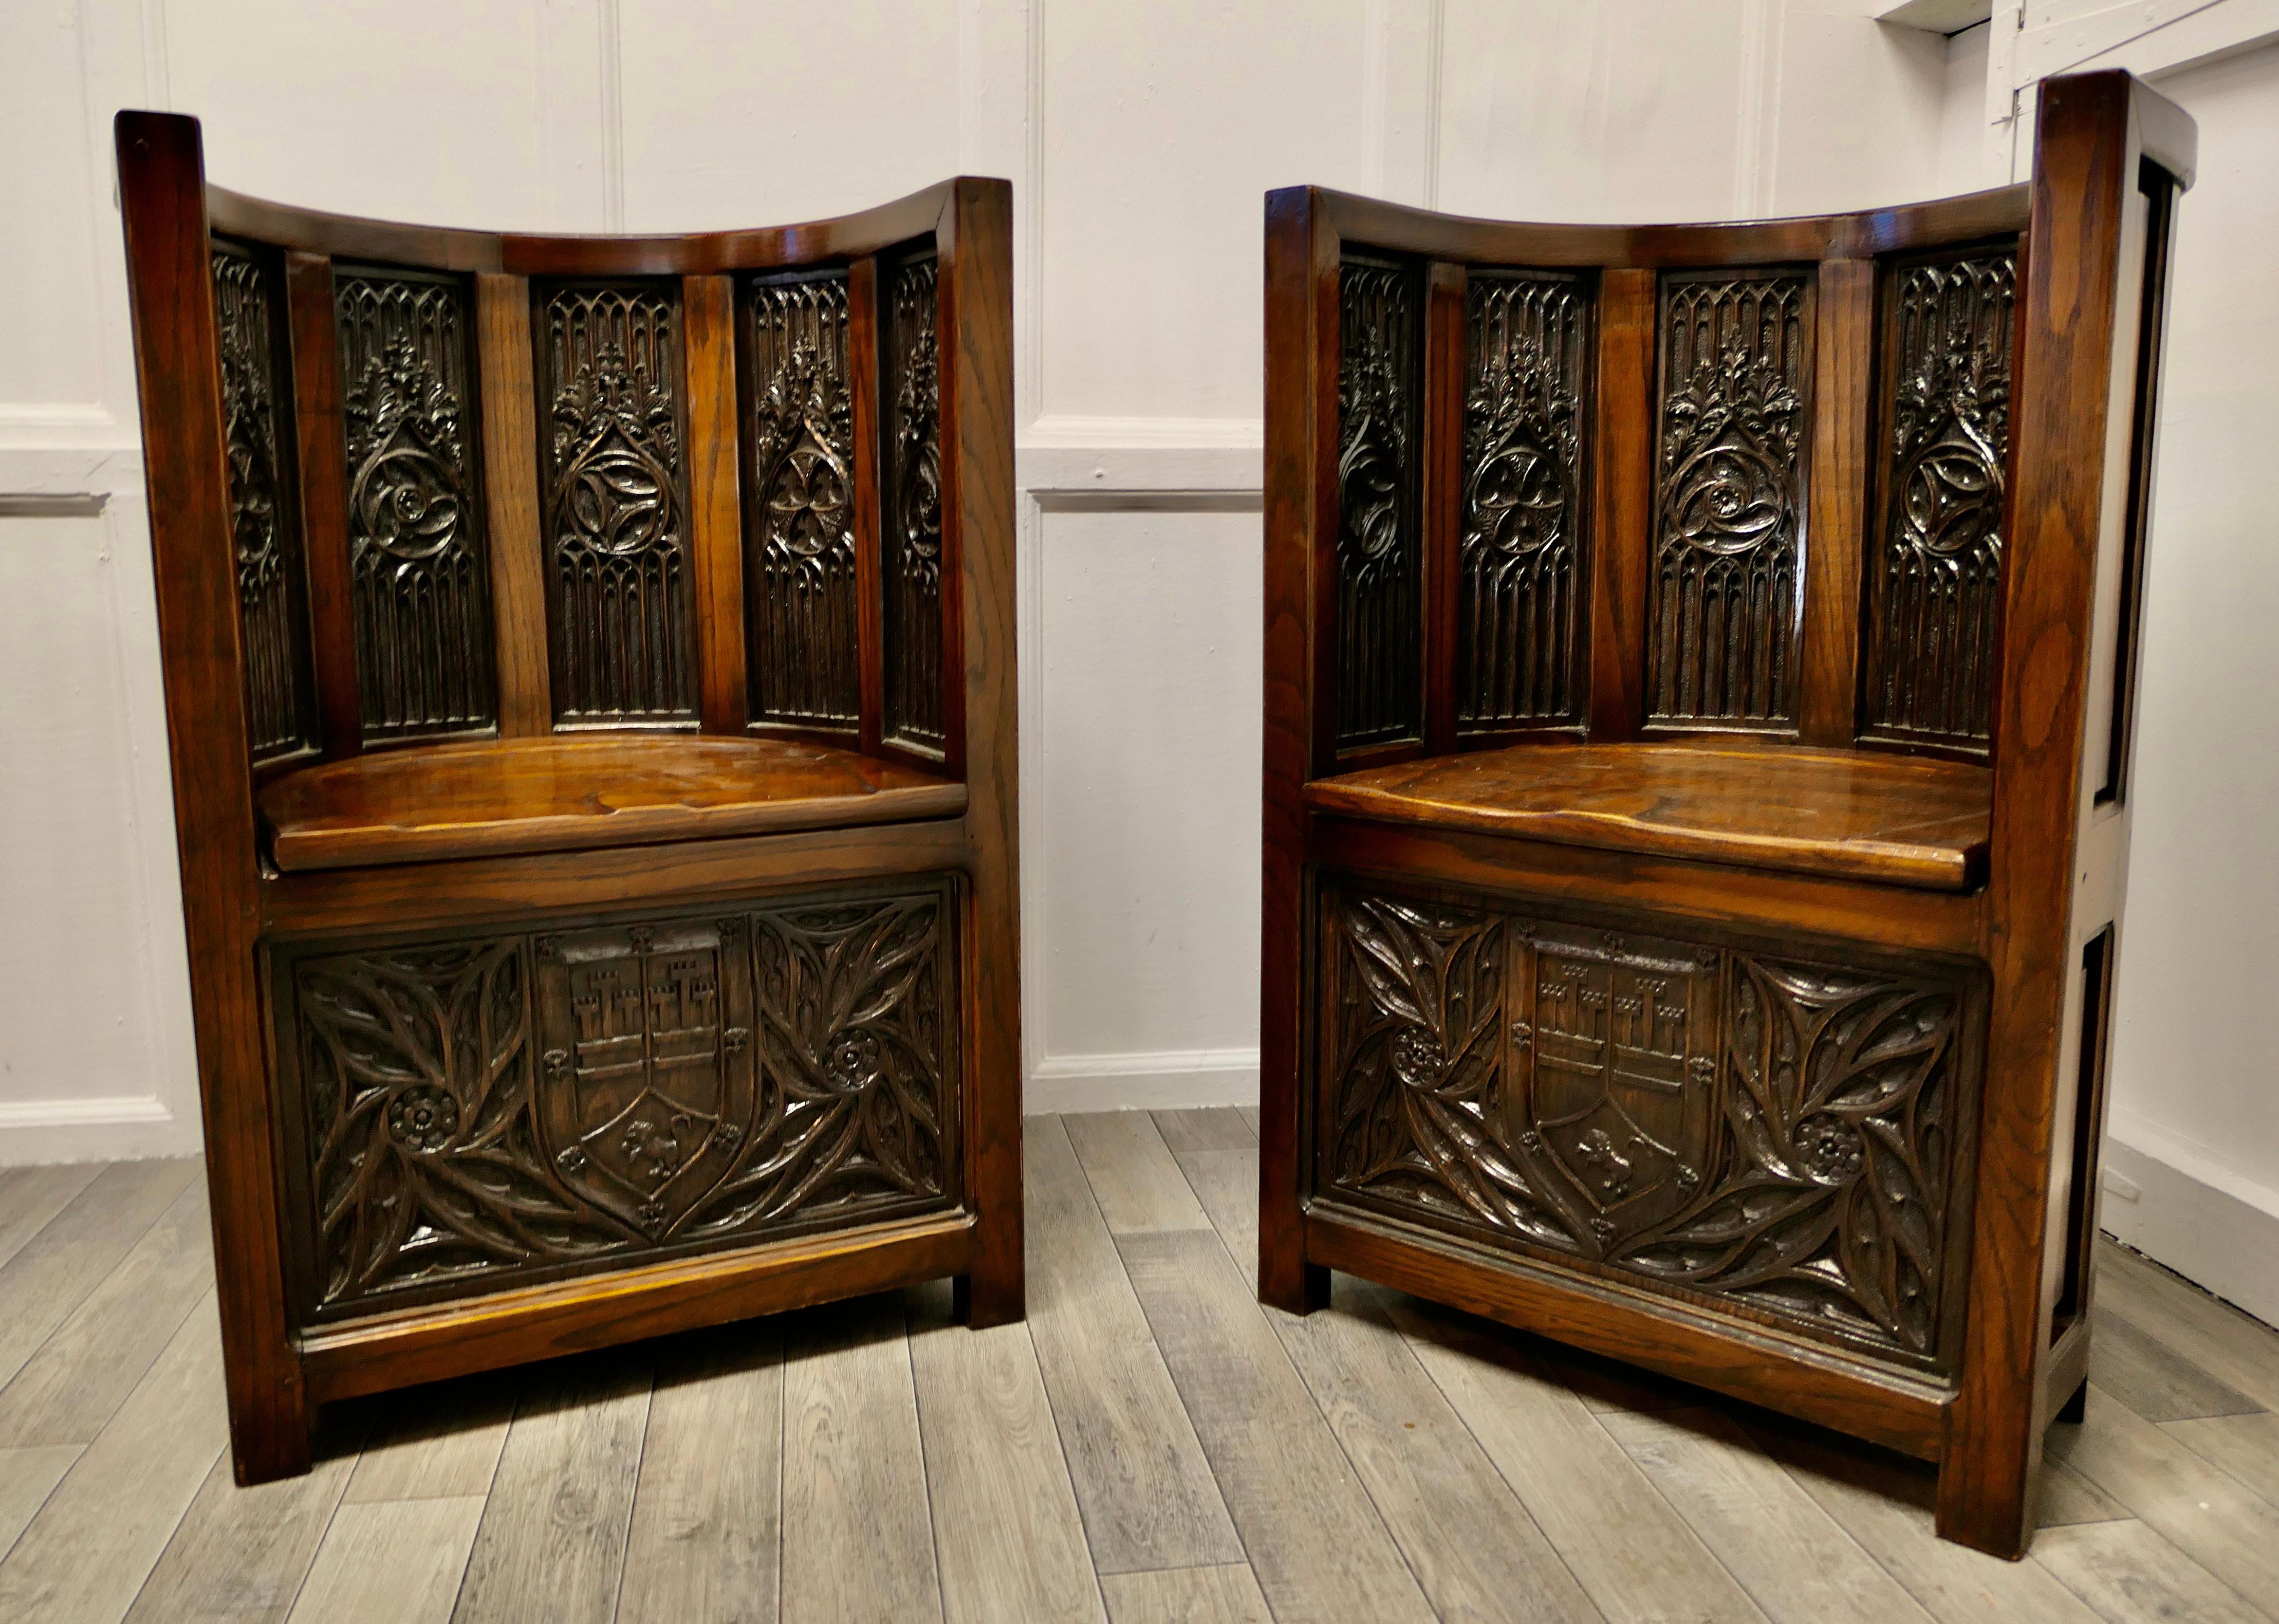 Pugin inspired Arts and Crafts carved barrel back hall chairs.

This is a beautifully designed pair of hall porters chairs from the 19th century Arts and Crafts movement Gothic Revival Style.
The chairs are of the finest quality, they are made in